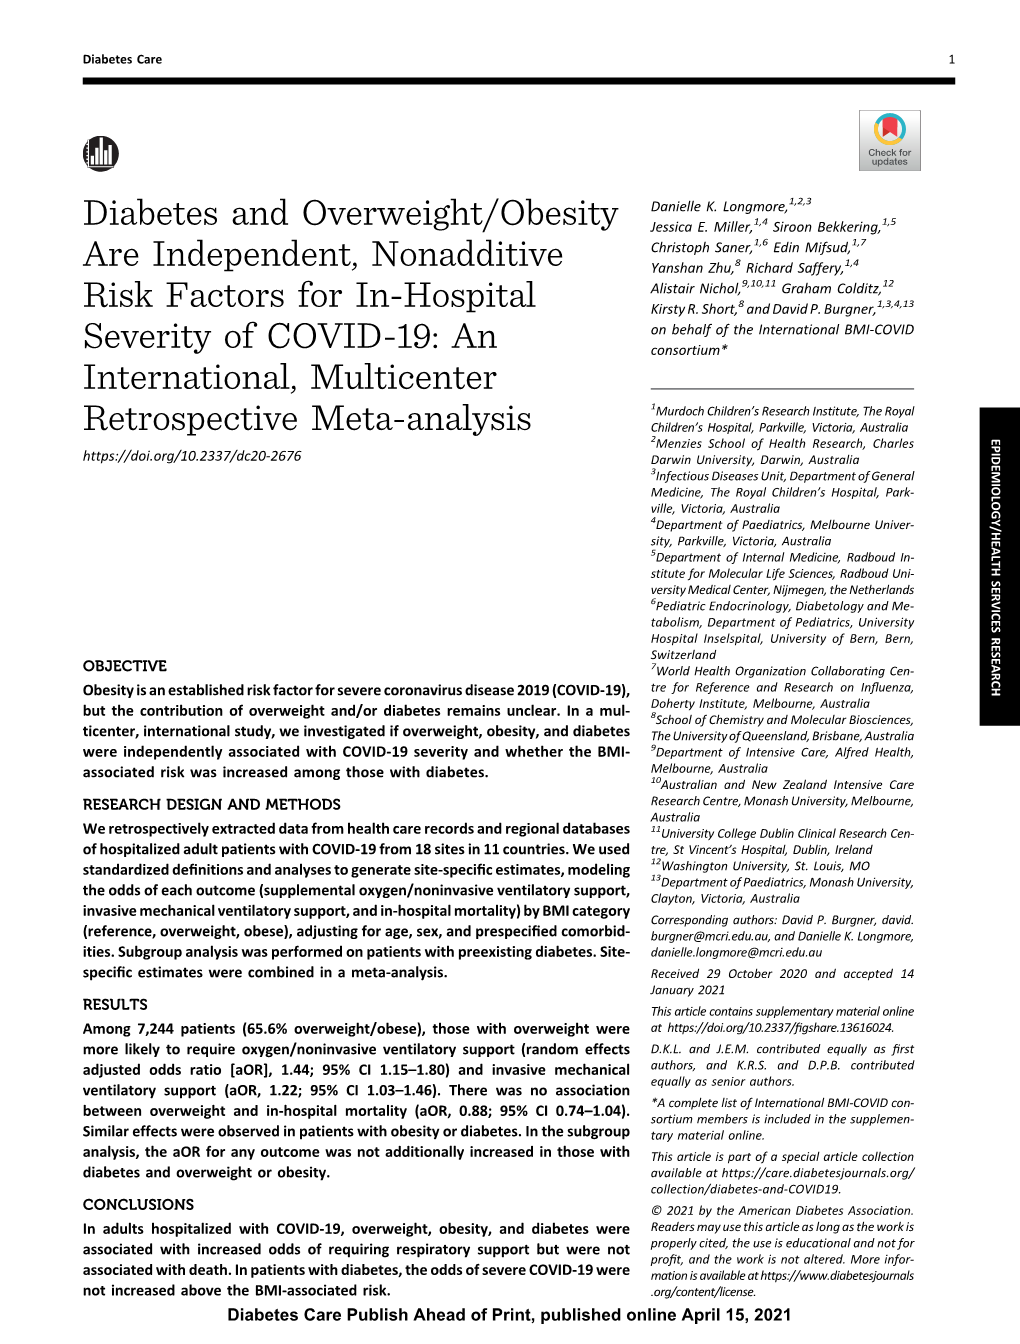 Diabetes and Overweight/Obesity Are Independent, Nonadditive Risk